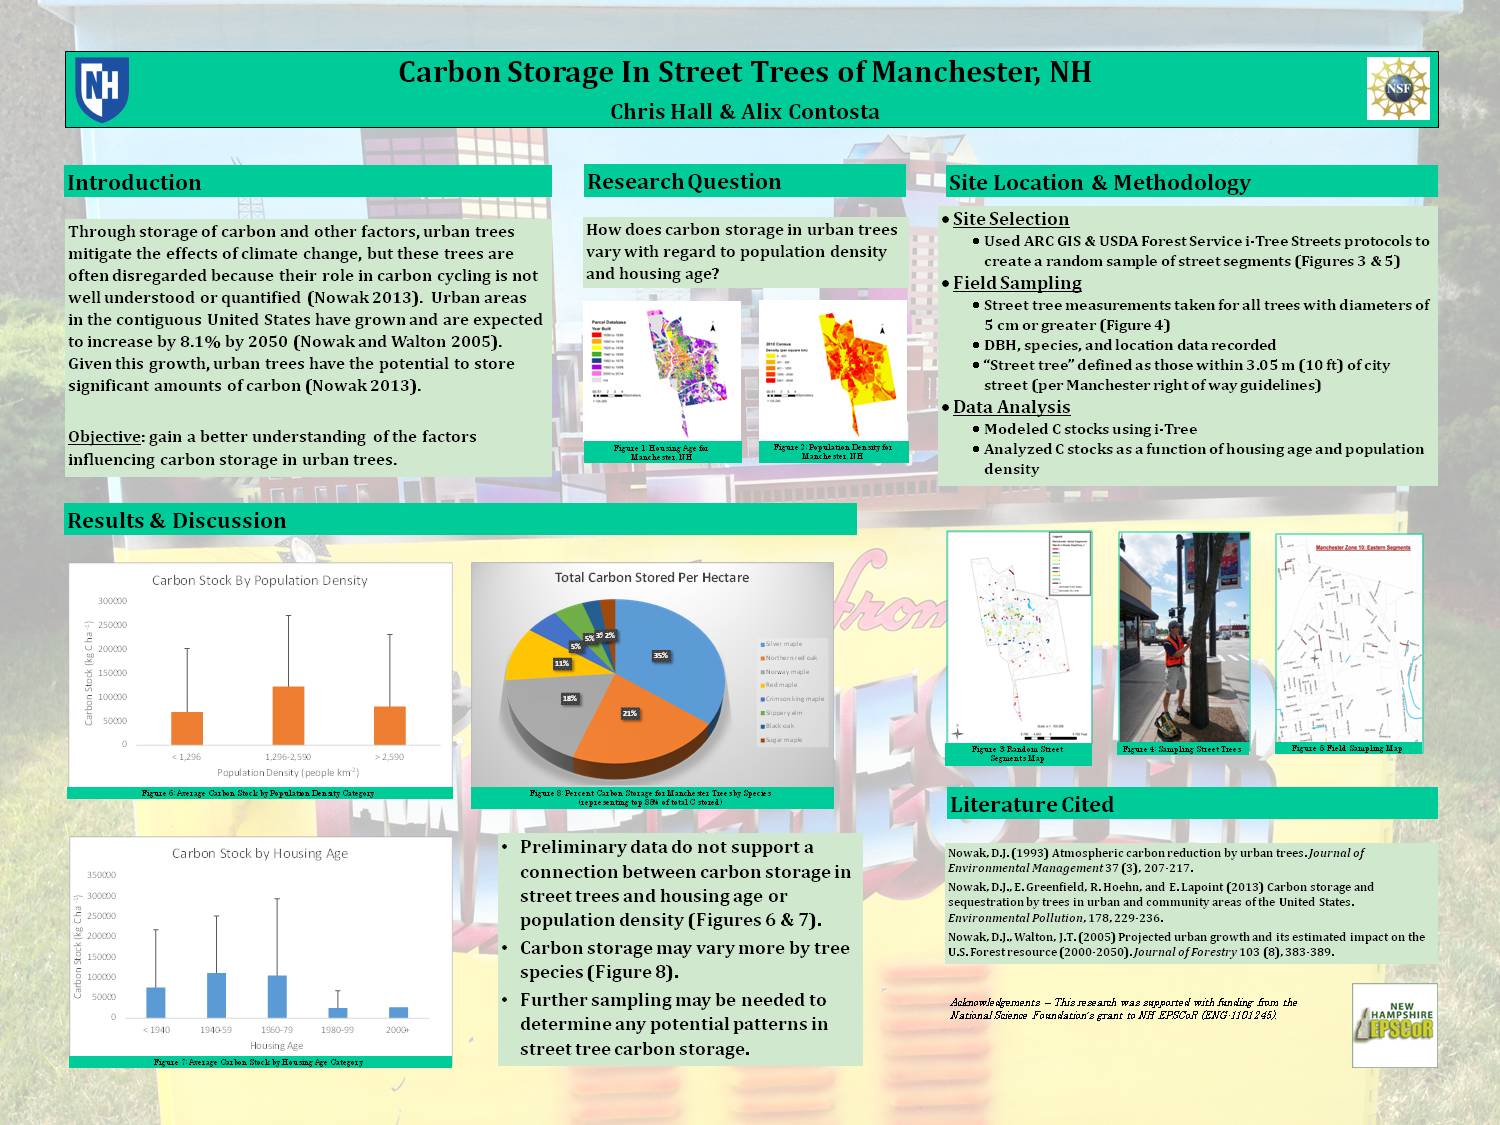 Carbon Storage In Street Trees Of Manchester, Nh by chall